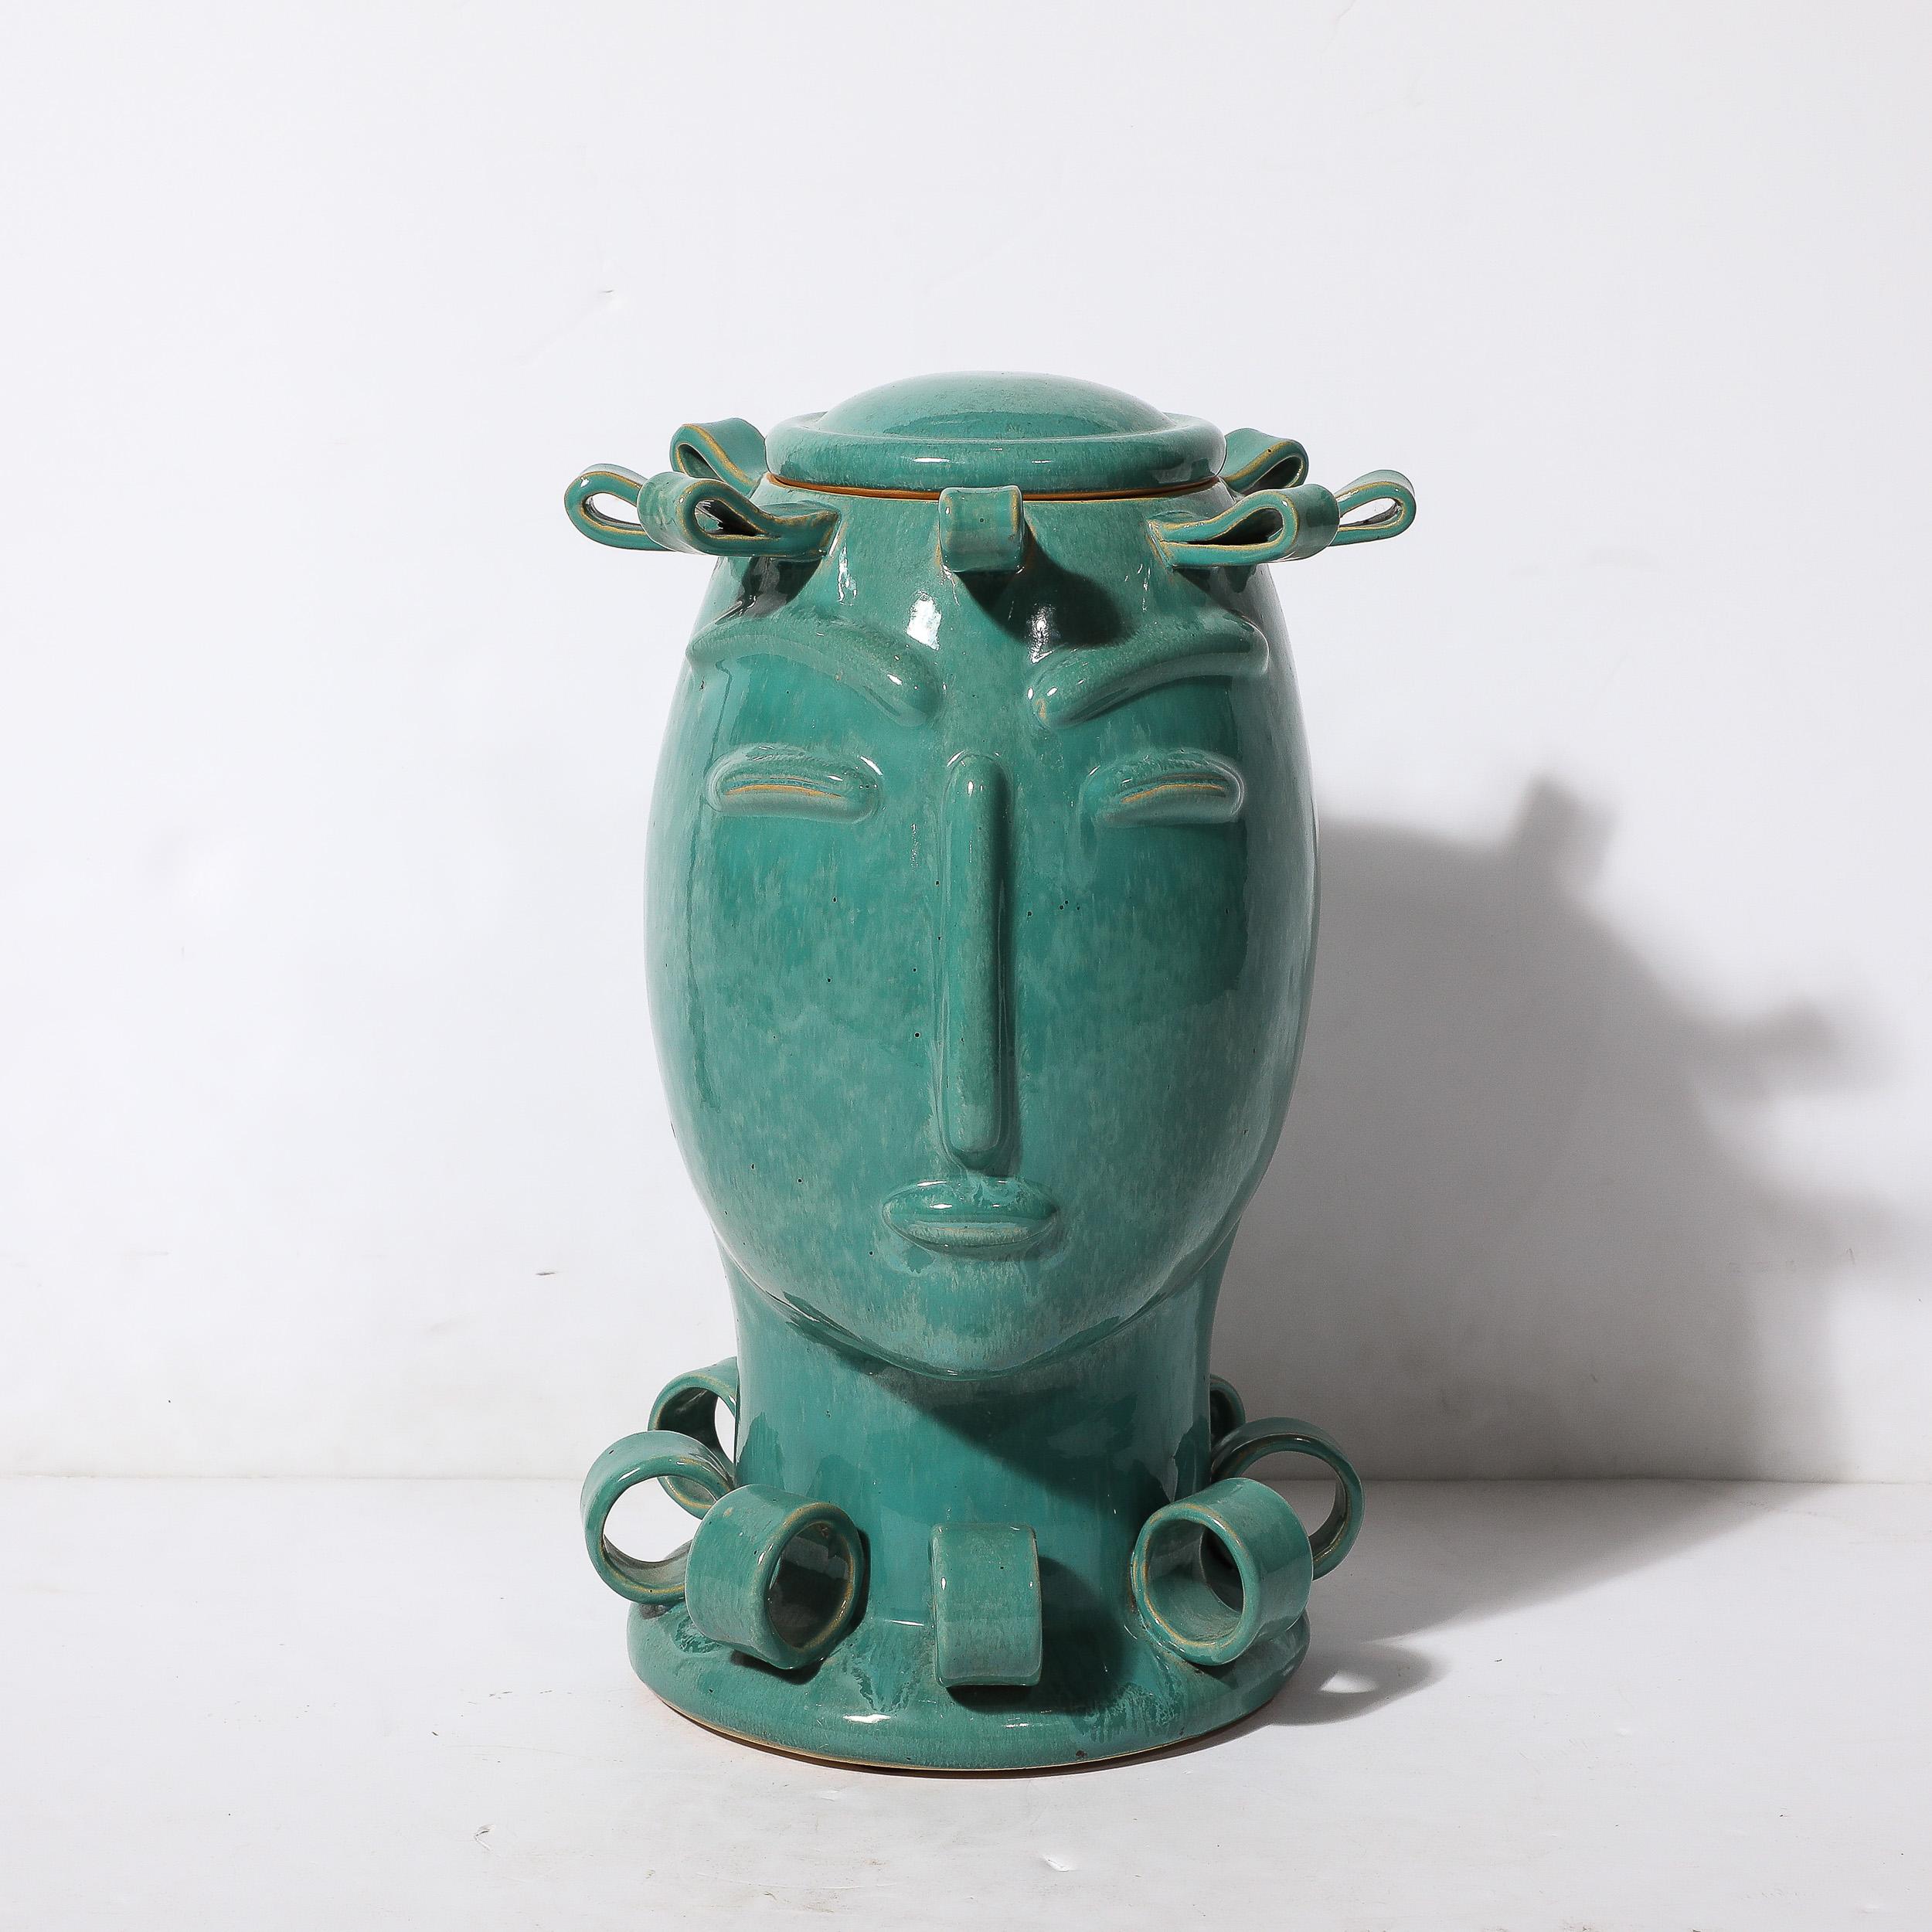 This unique and stunning Art Deco Sculptural Ceramic Vase of Head in Turquoise Jade W/ Ribbon Detailing originates from France, Circa 1930. Formed in beautifully abstracted minimal geometric motifs comprising the facial features and ribbon form